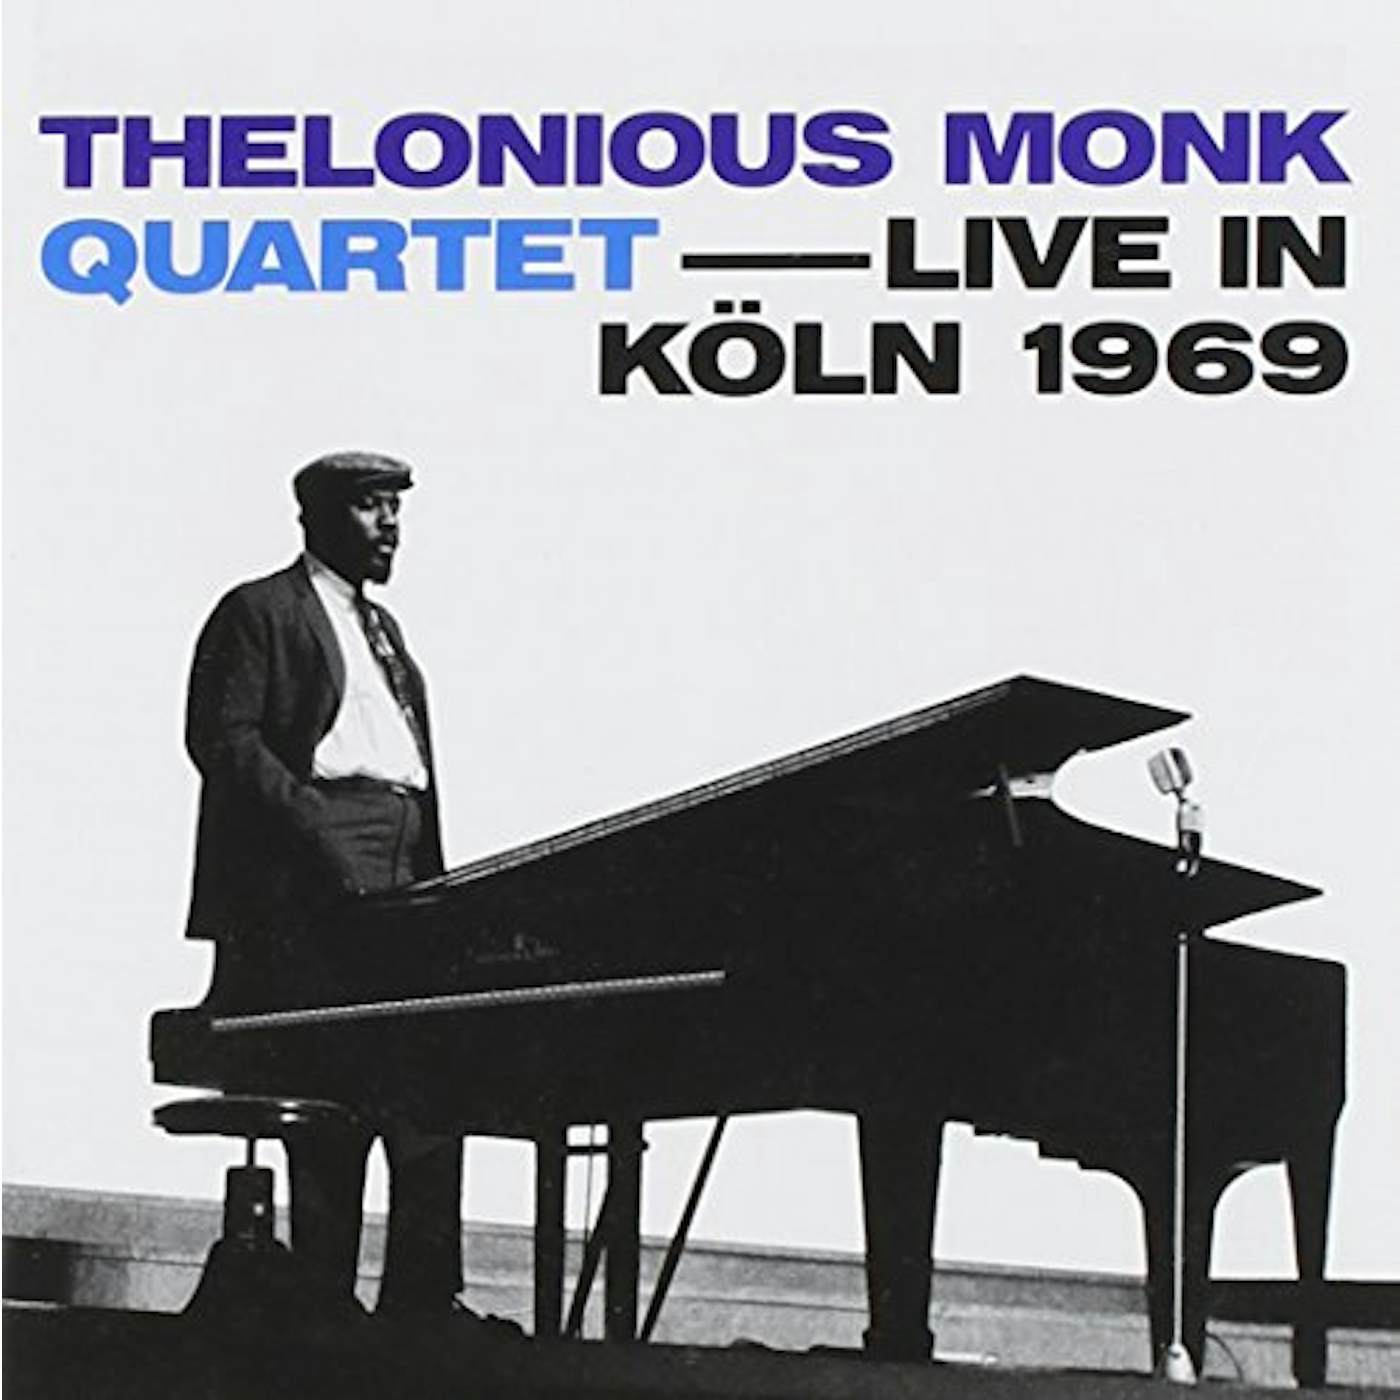 Thelonious Monk LIVE IN KOLN 1969 CD